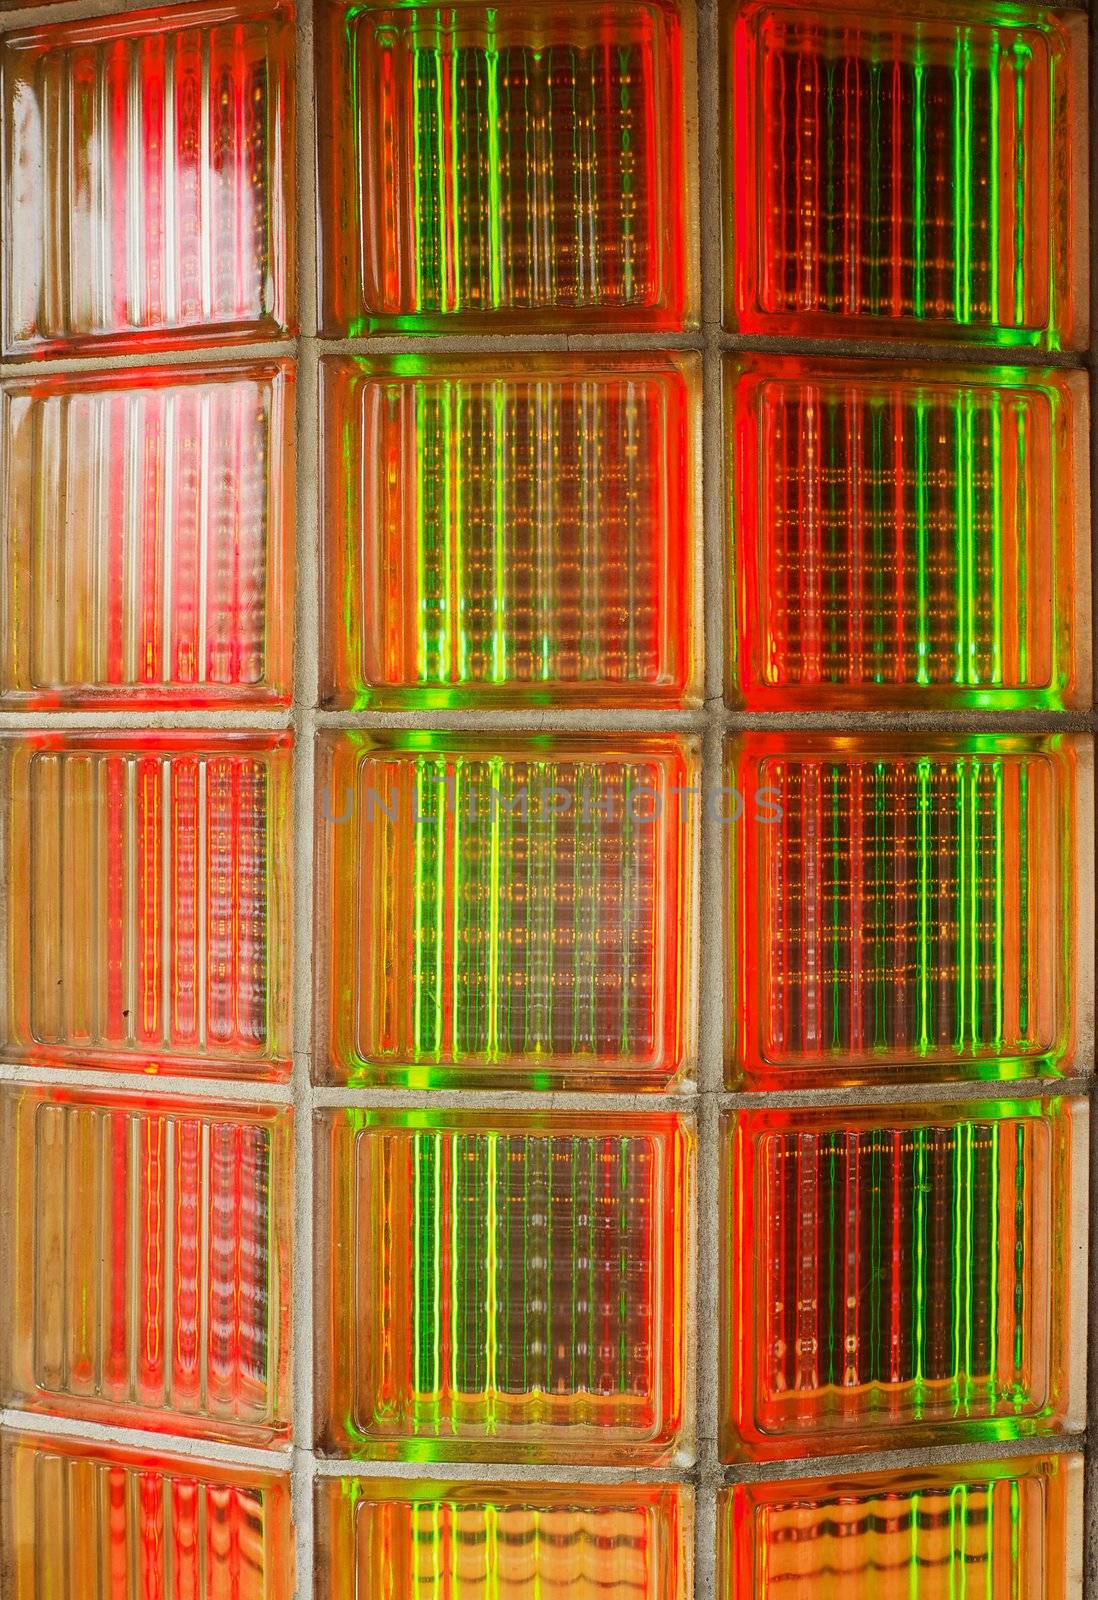 Curved glass brick wall lit from behind with red and green neon lights